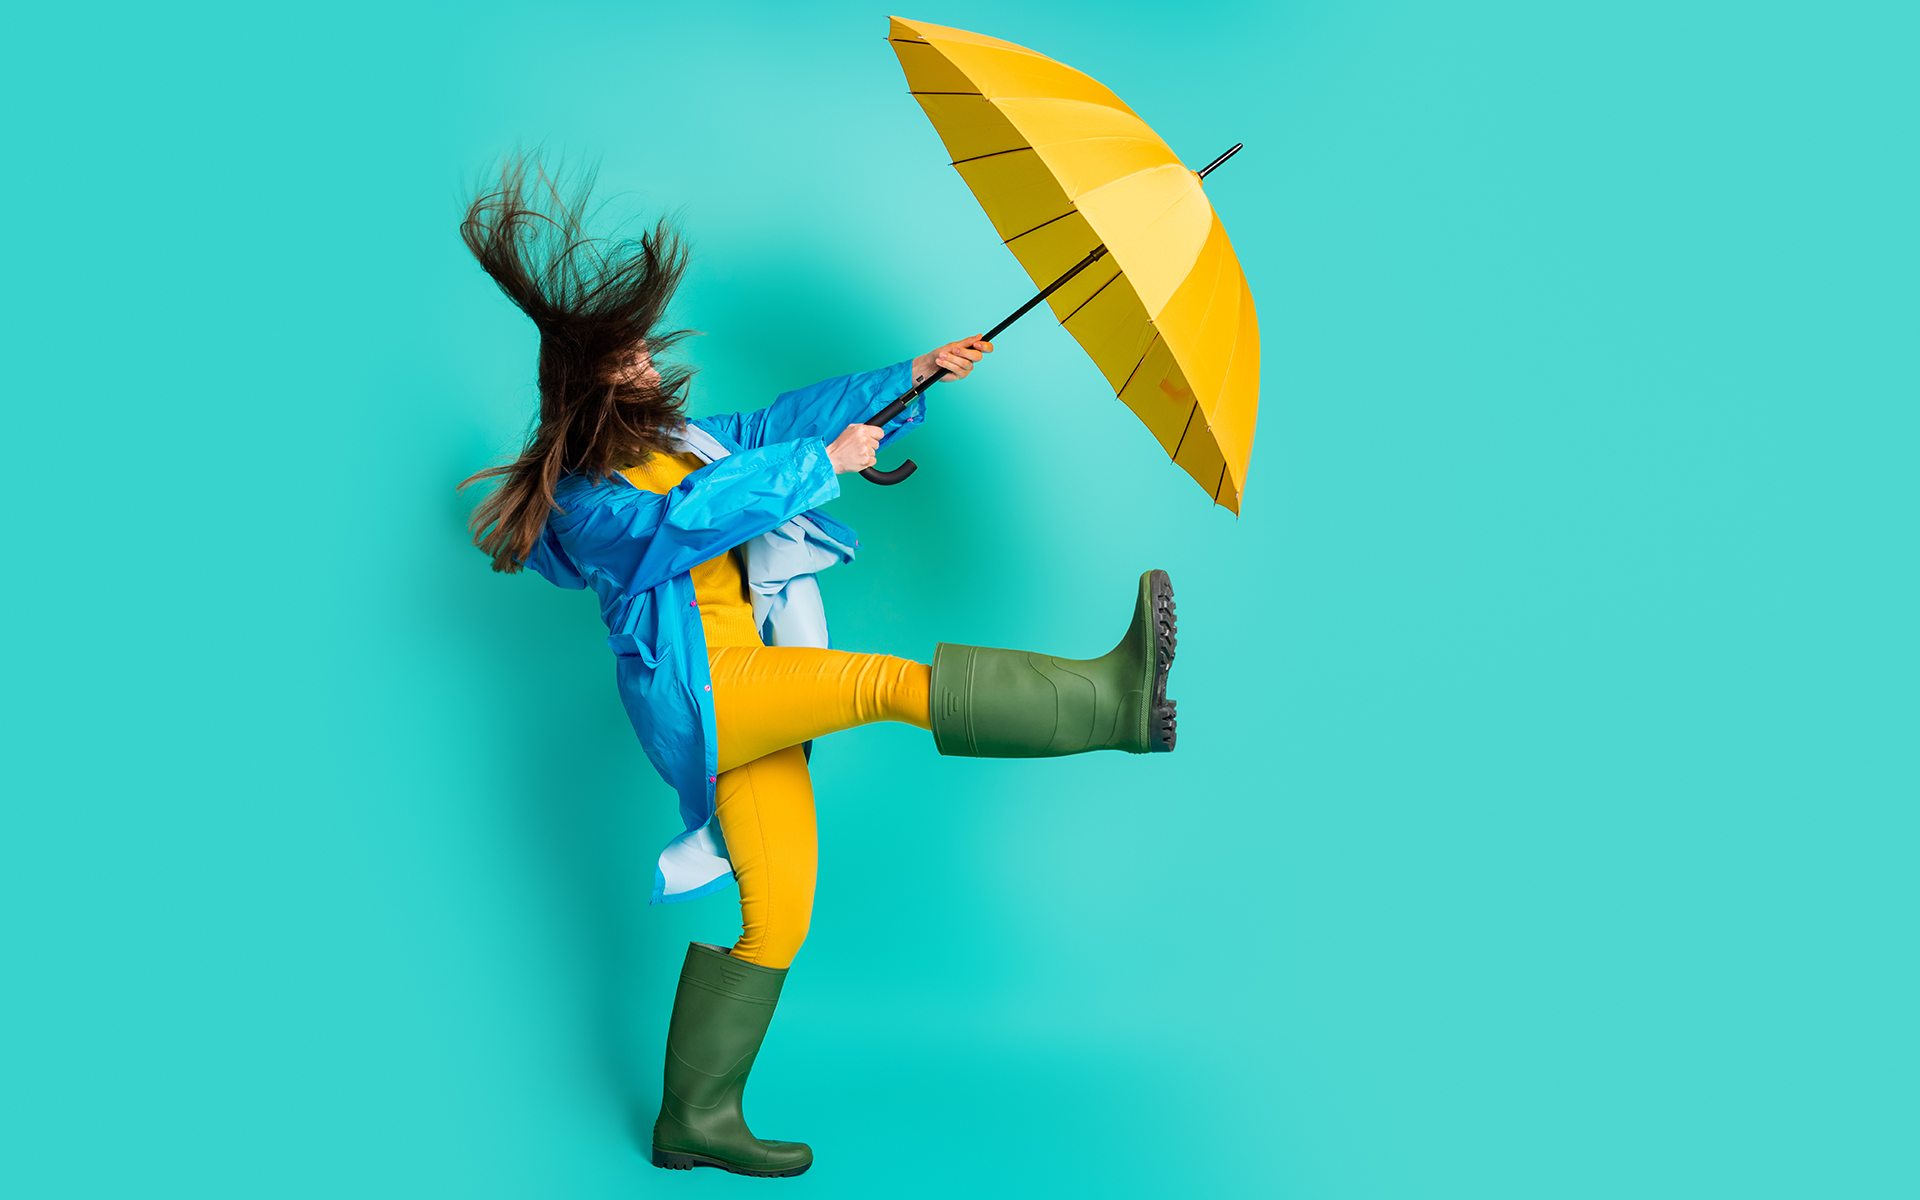 A 12-Minute Meditation to Create Space in a Storm of Emotions—Photo of a woman whose yellow umbrella is caught in the wind with teal studio background.